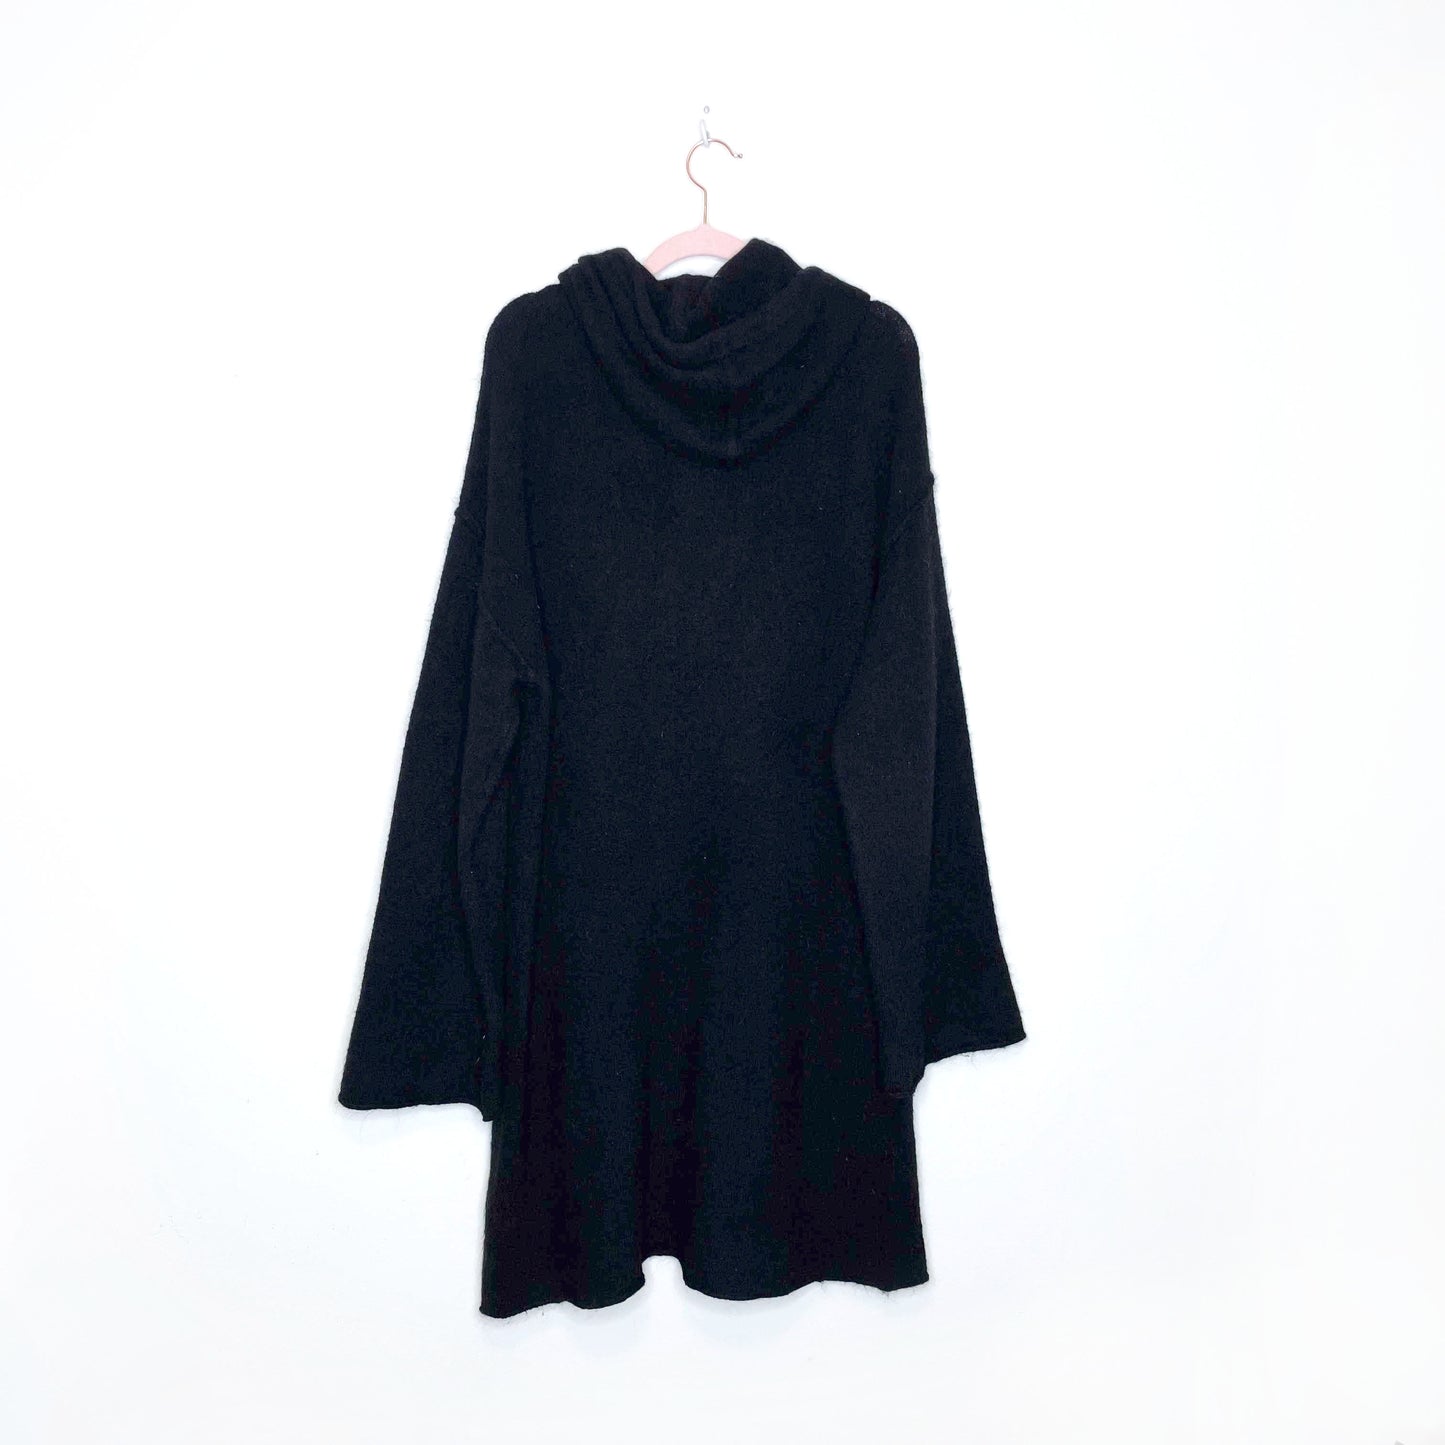 wilfred free black alpaca sissi hooded sweater dress - size large